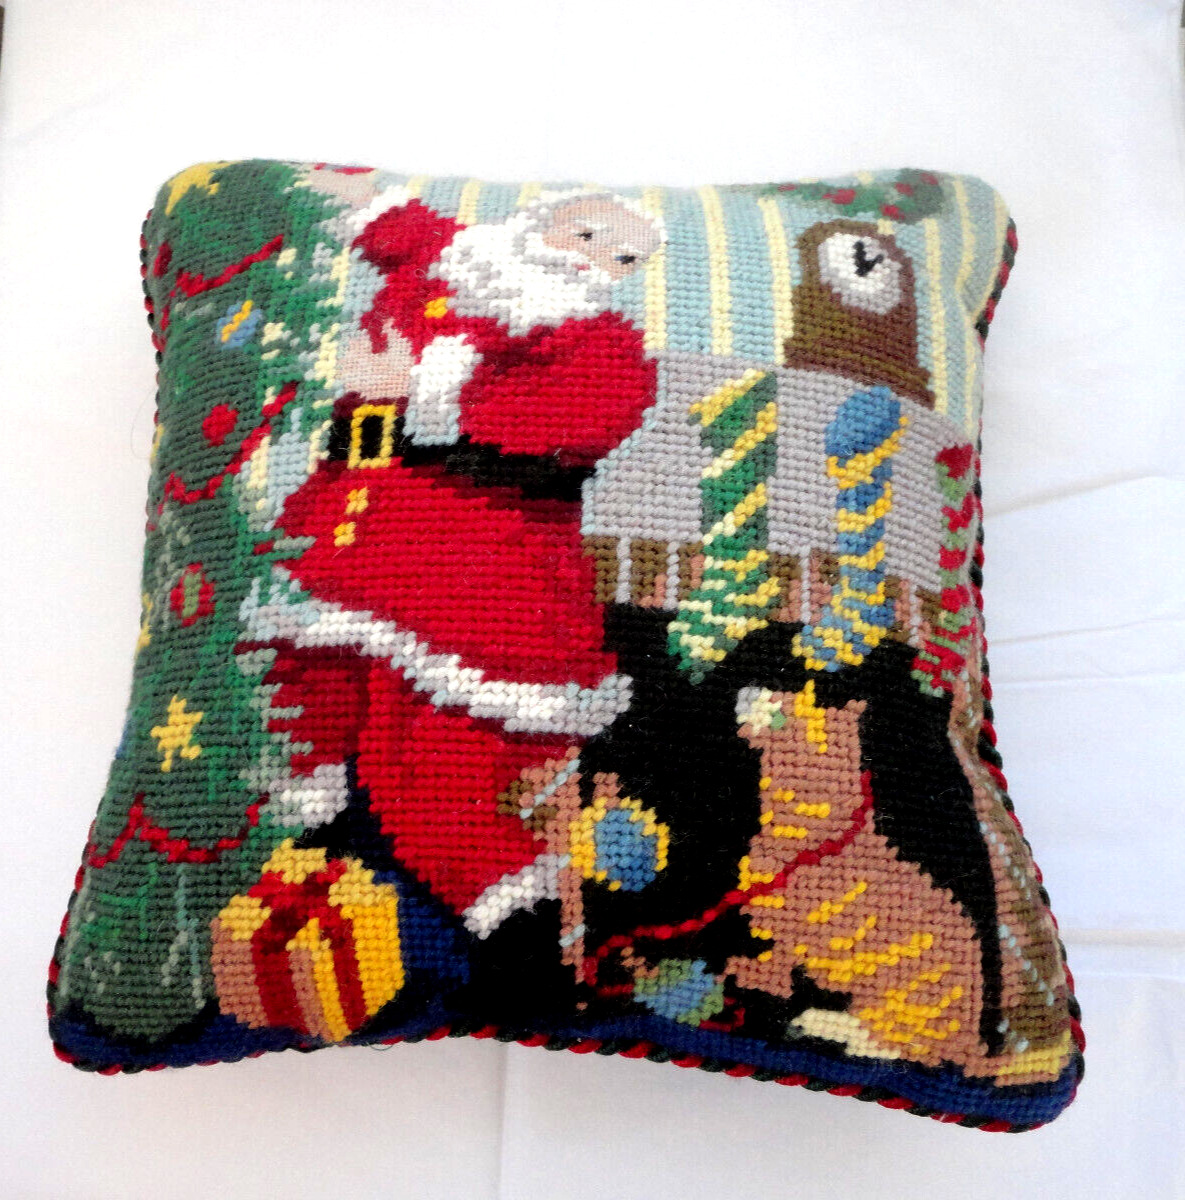 Sweet little vintage needlepoint pillow SANTA CLAUS trimming the Christmas tree